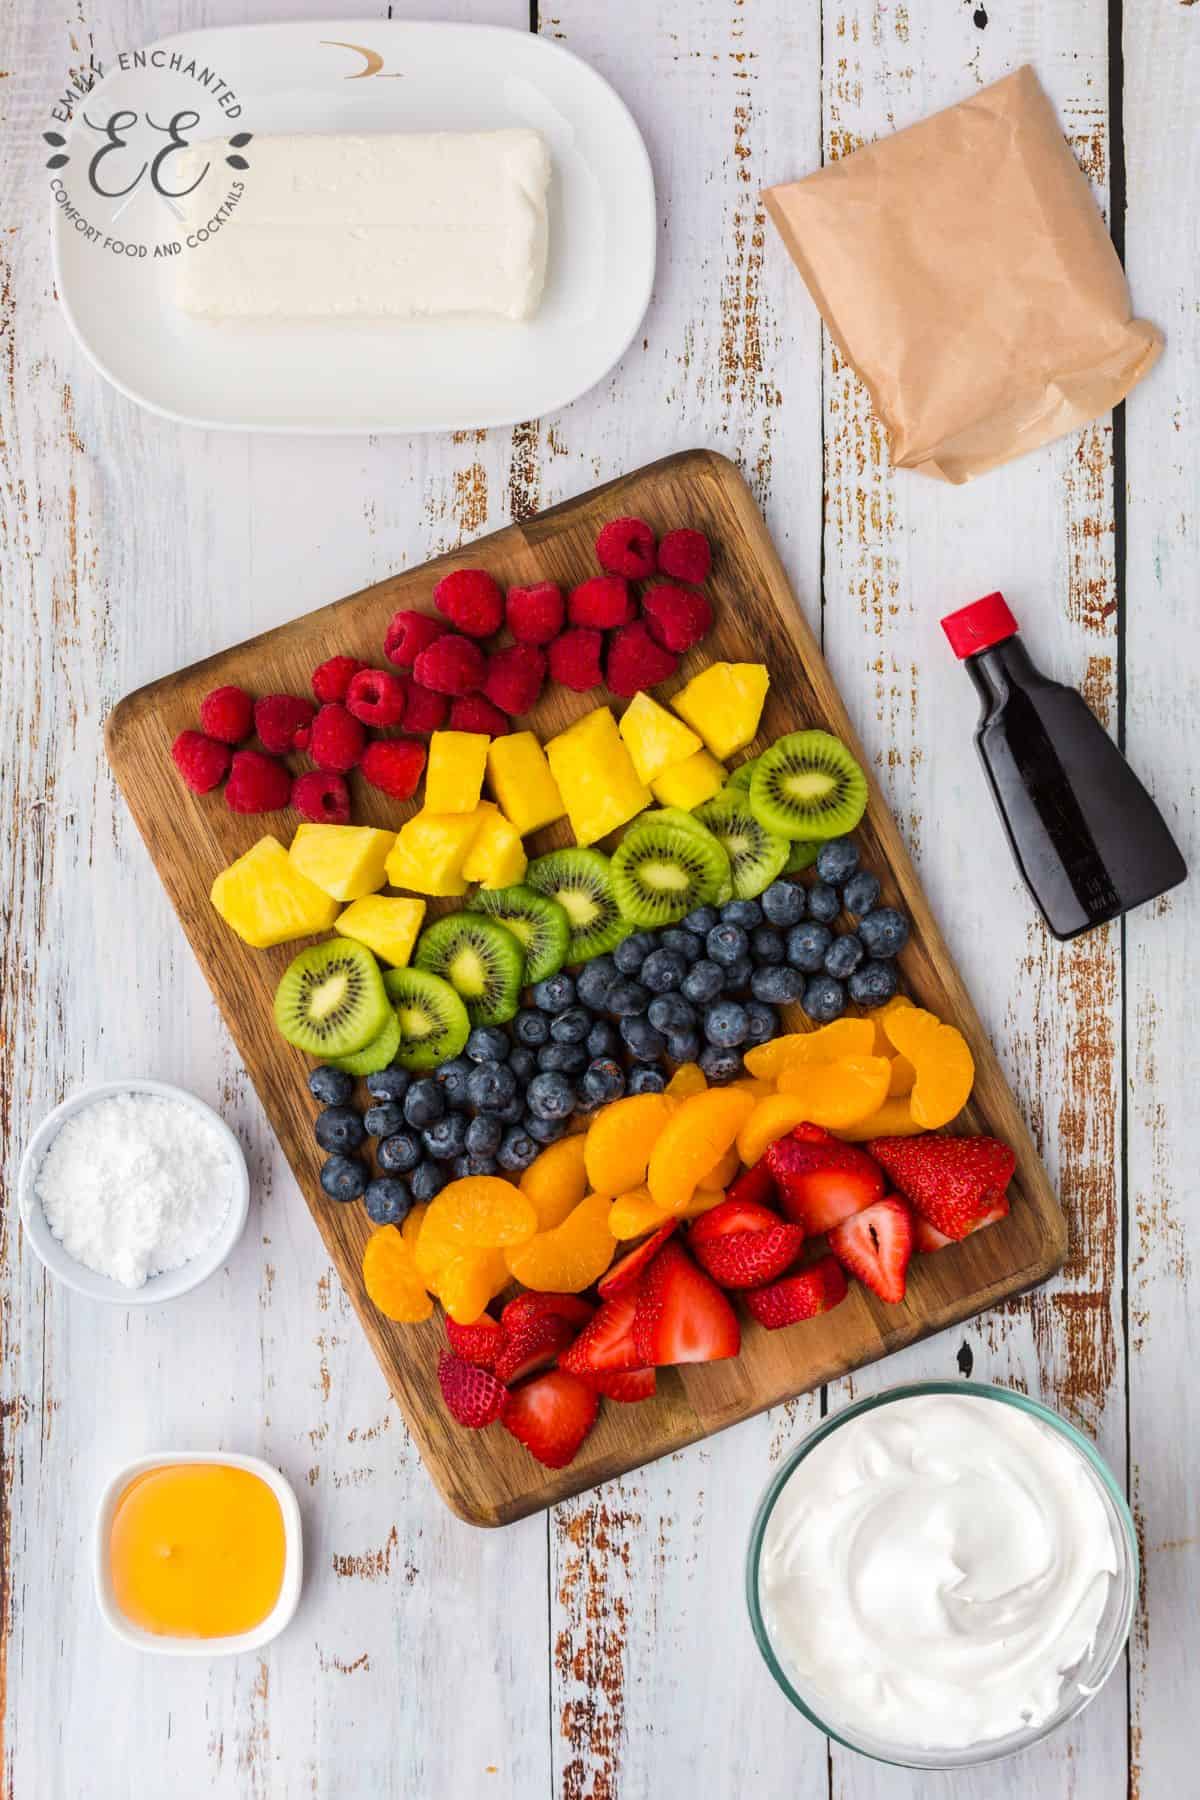 Sliced fruit and berries in rows on a cutting board